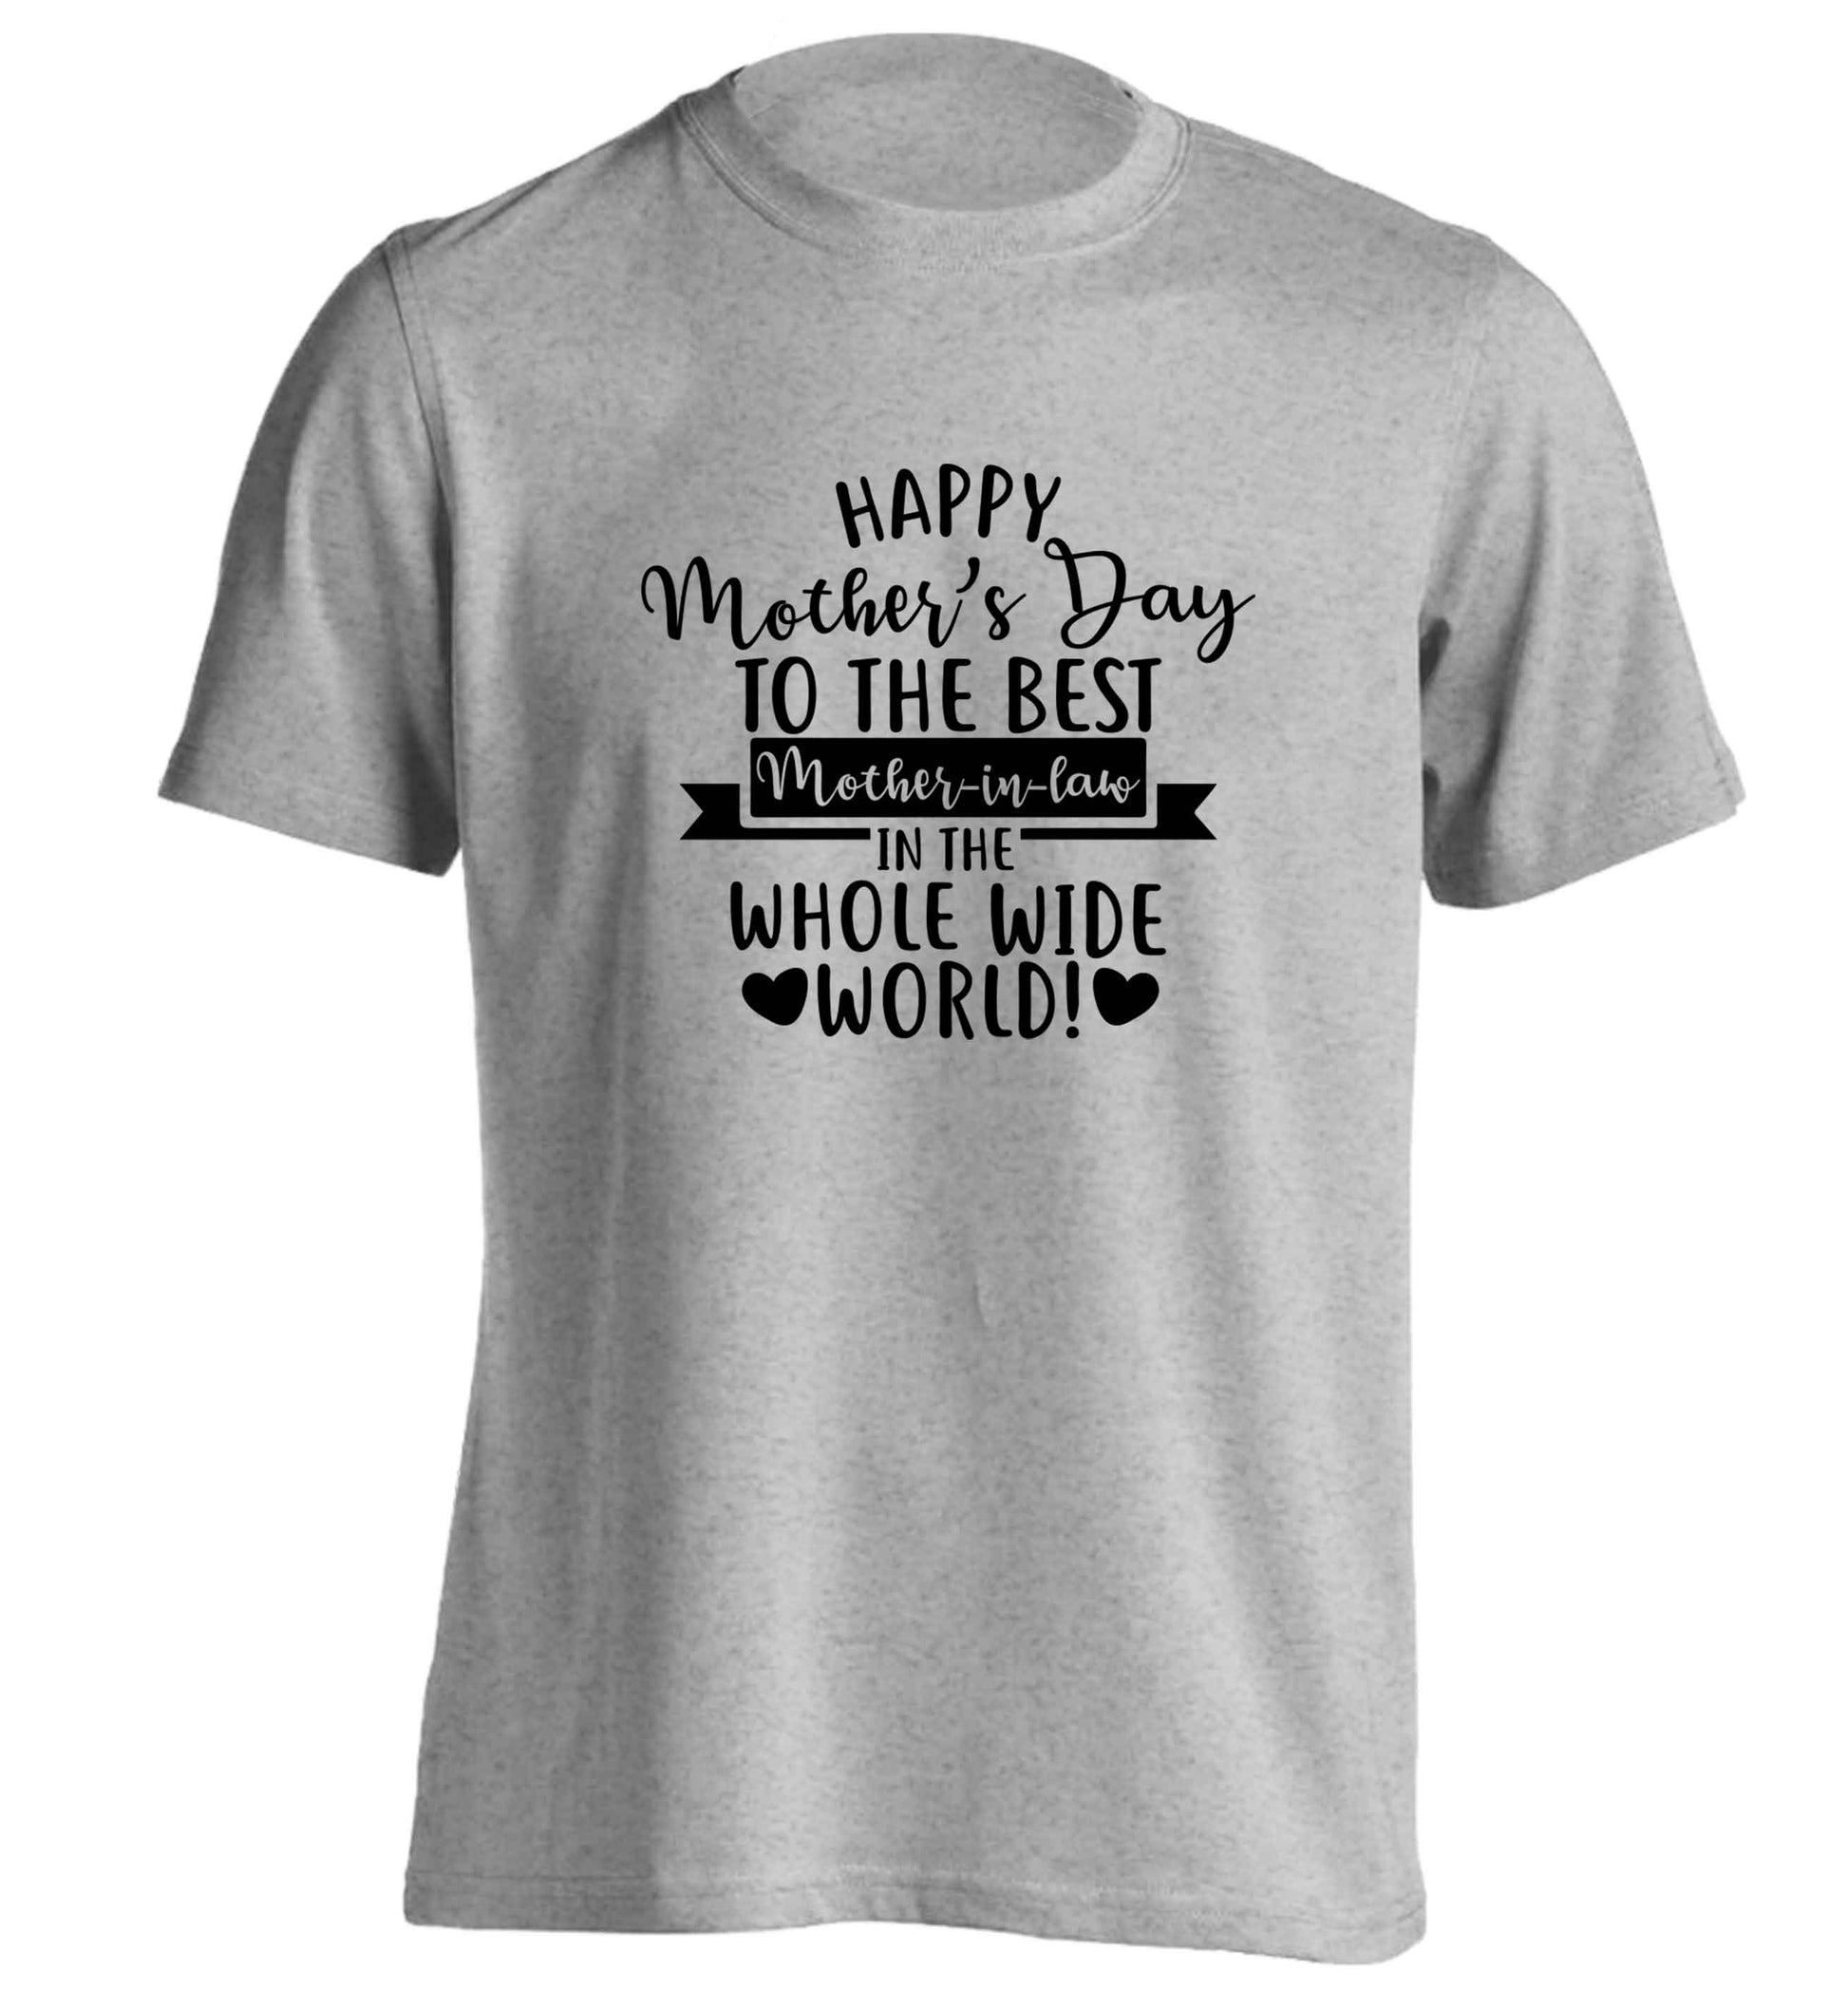 Happy mother's day to the best mother-in law in the world adults unisex grey Tshirt 2XL